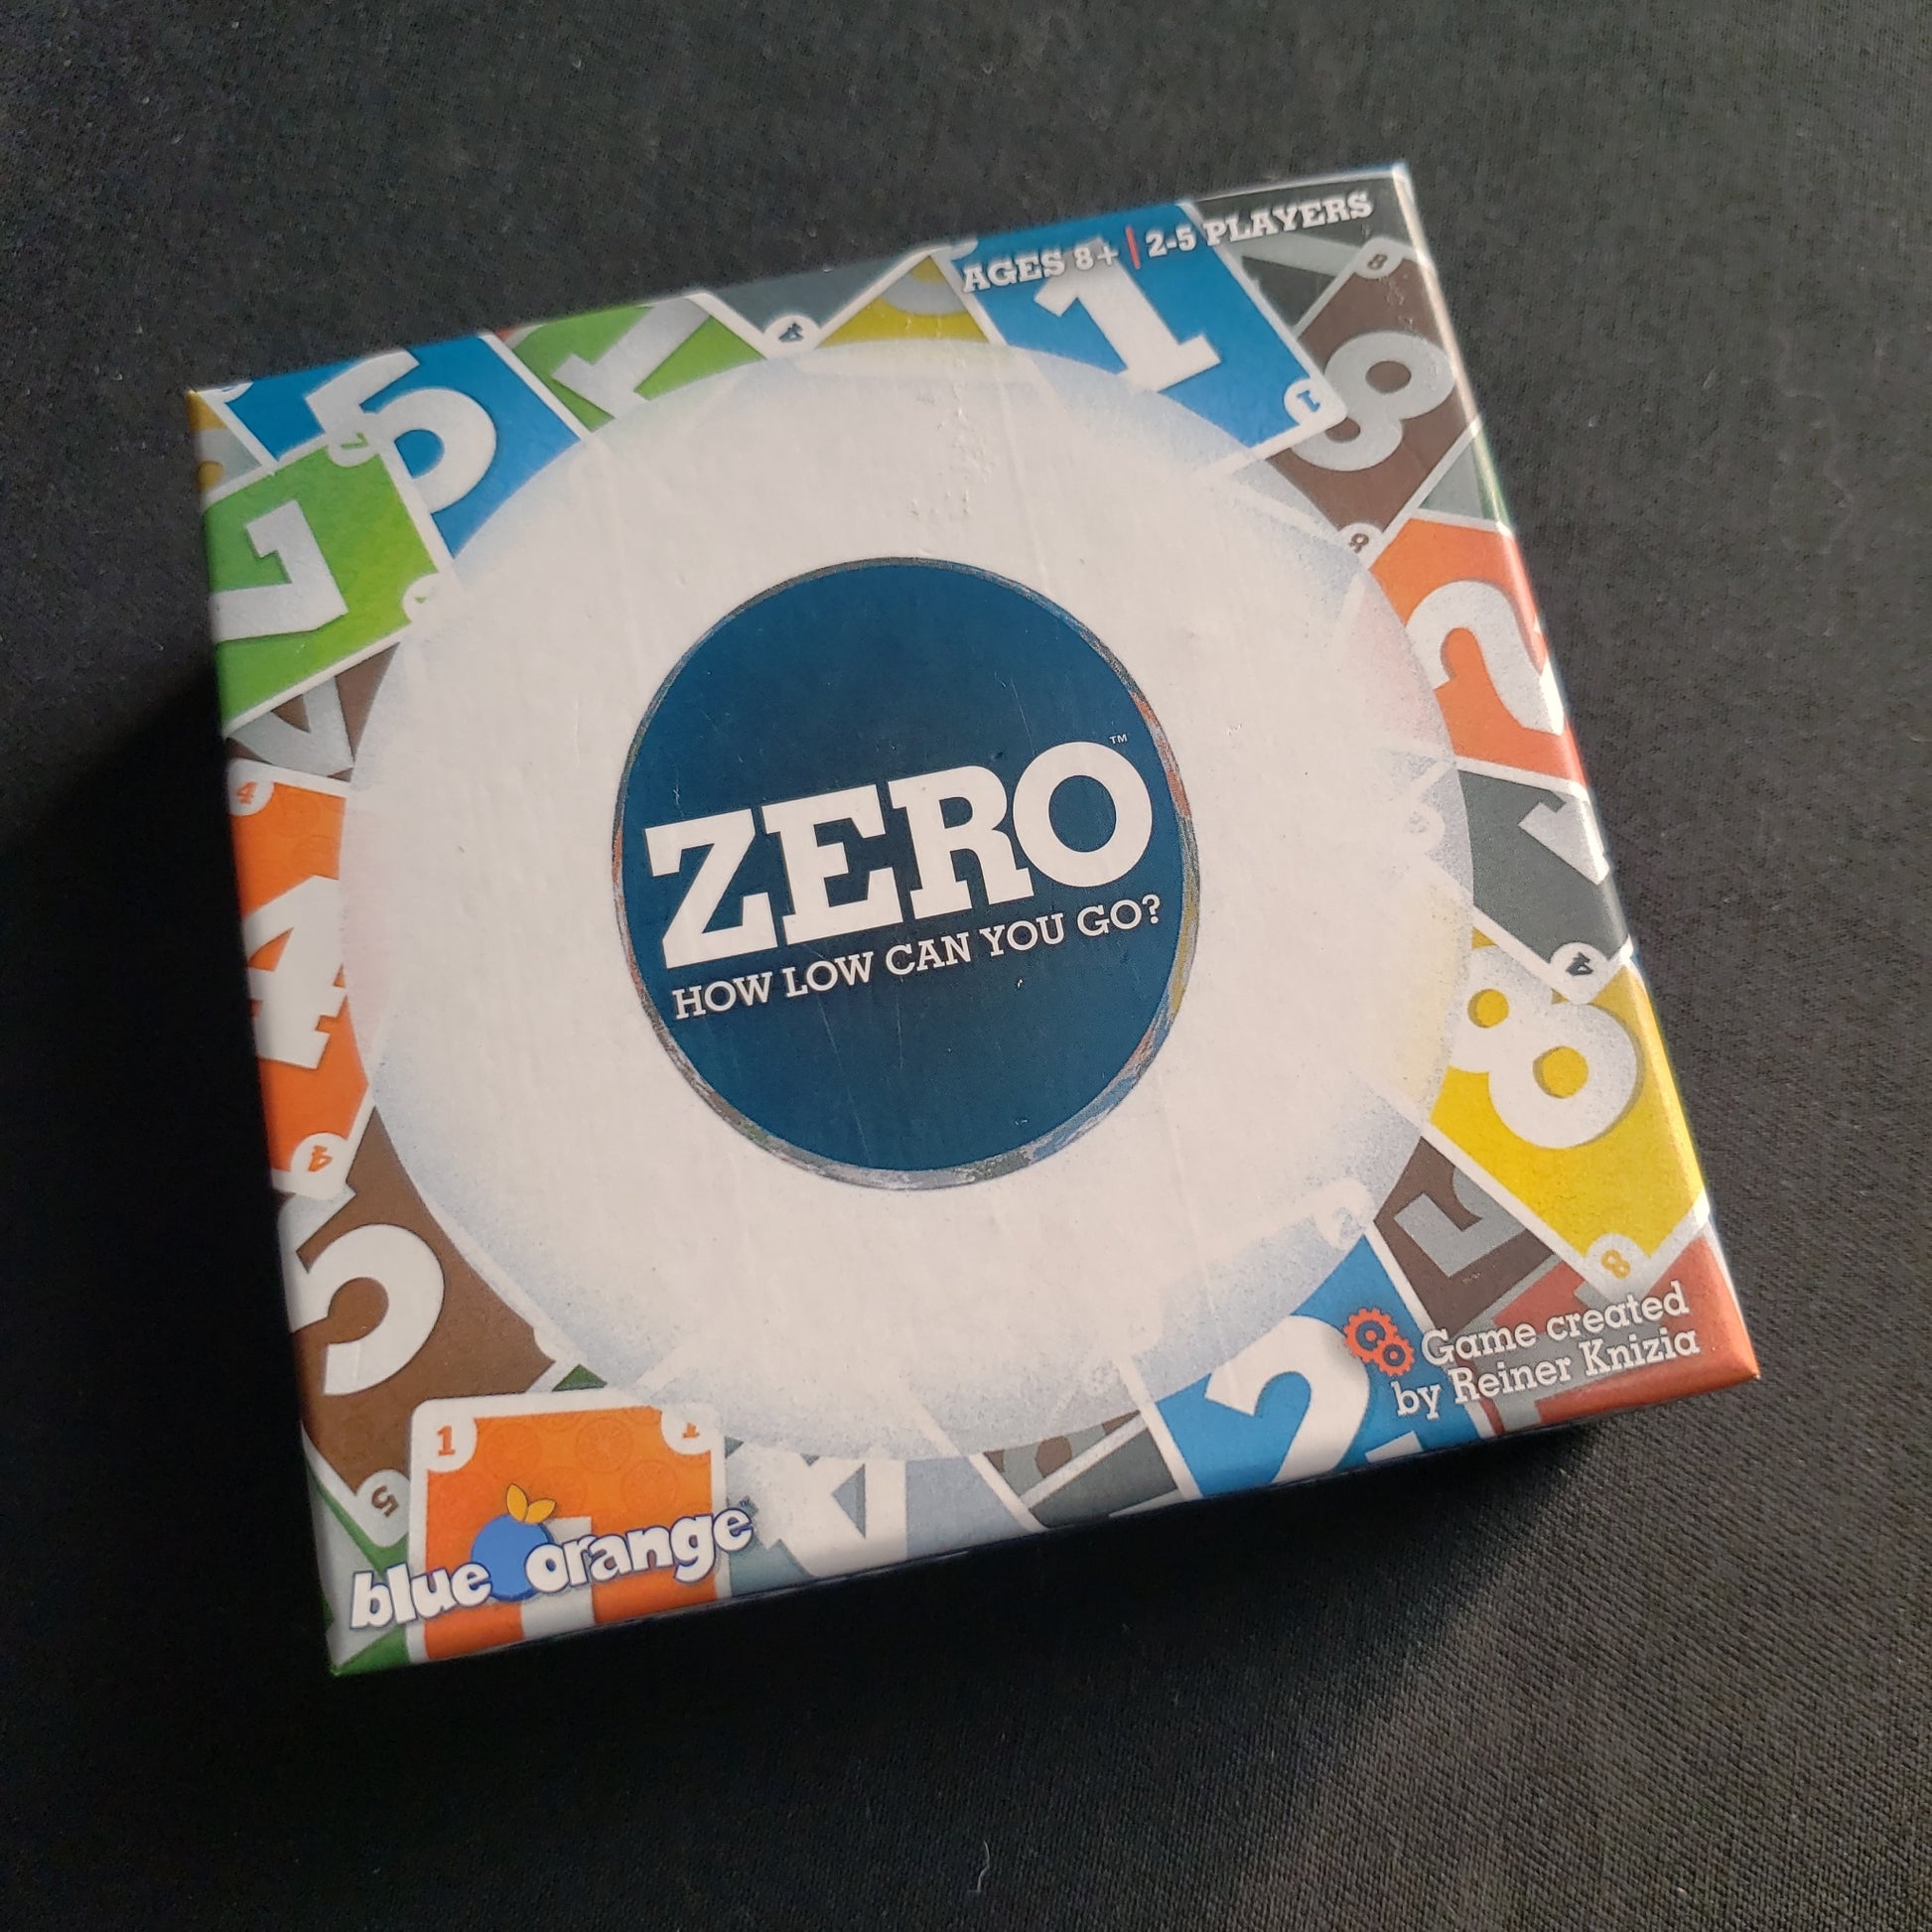 Image shows the front cover of the box of the Zero card game